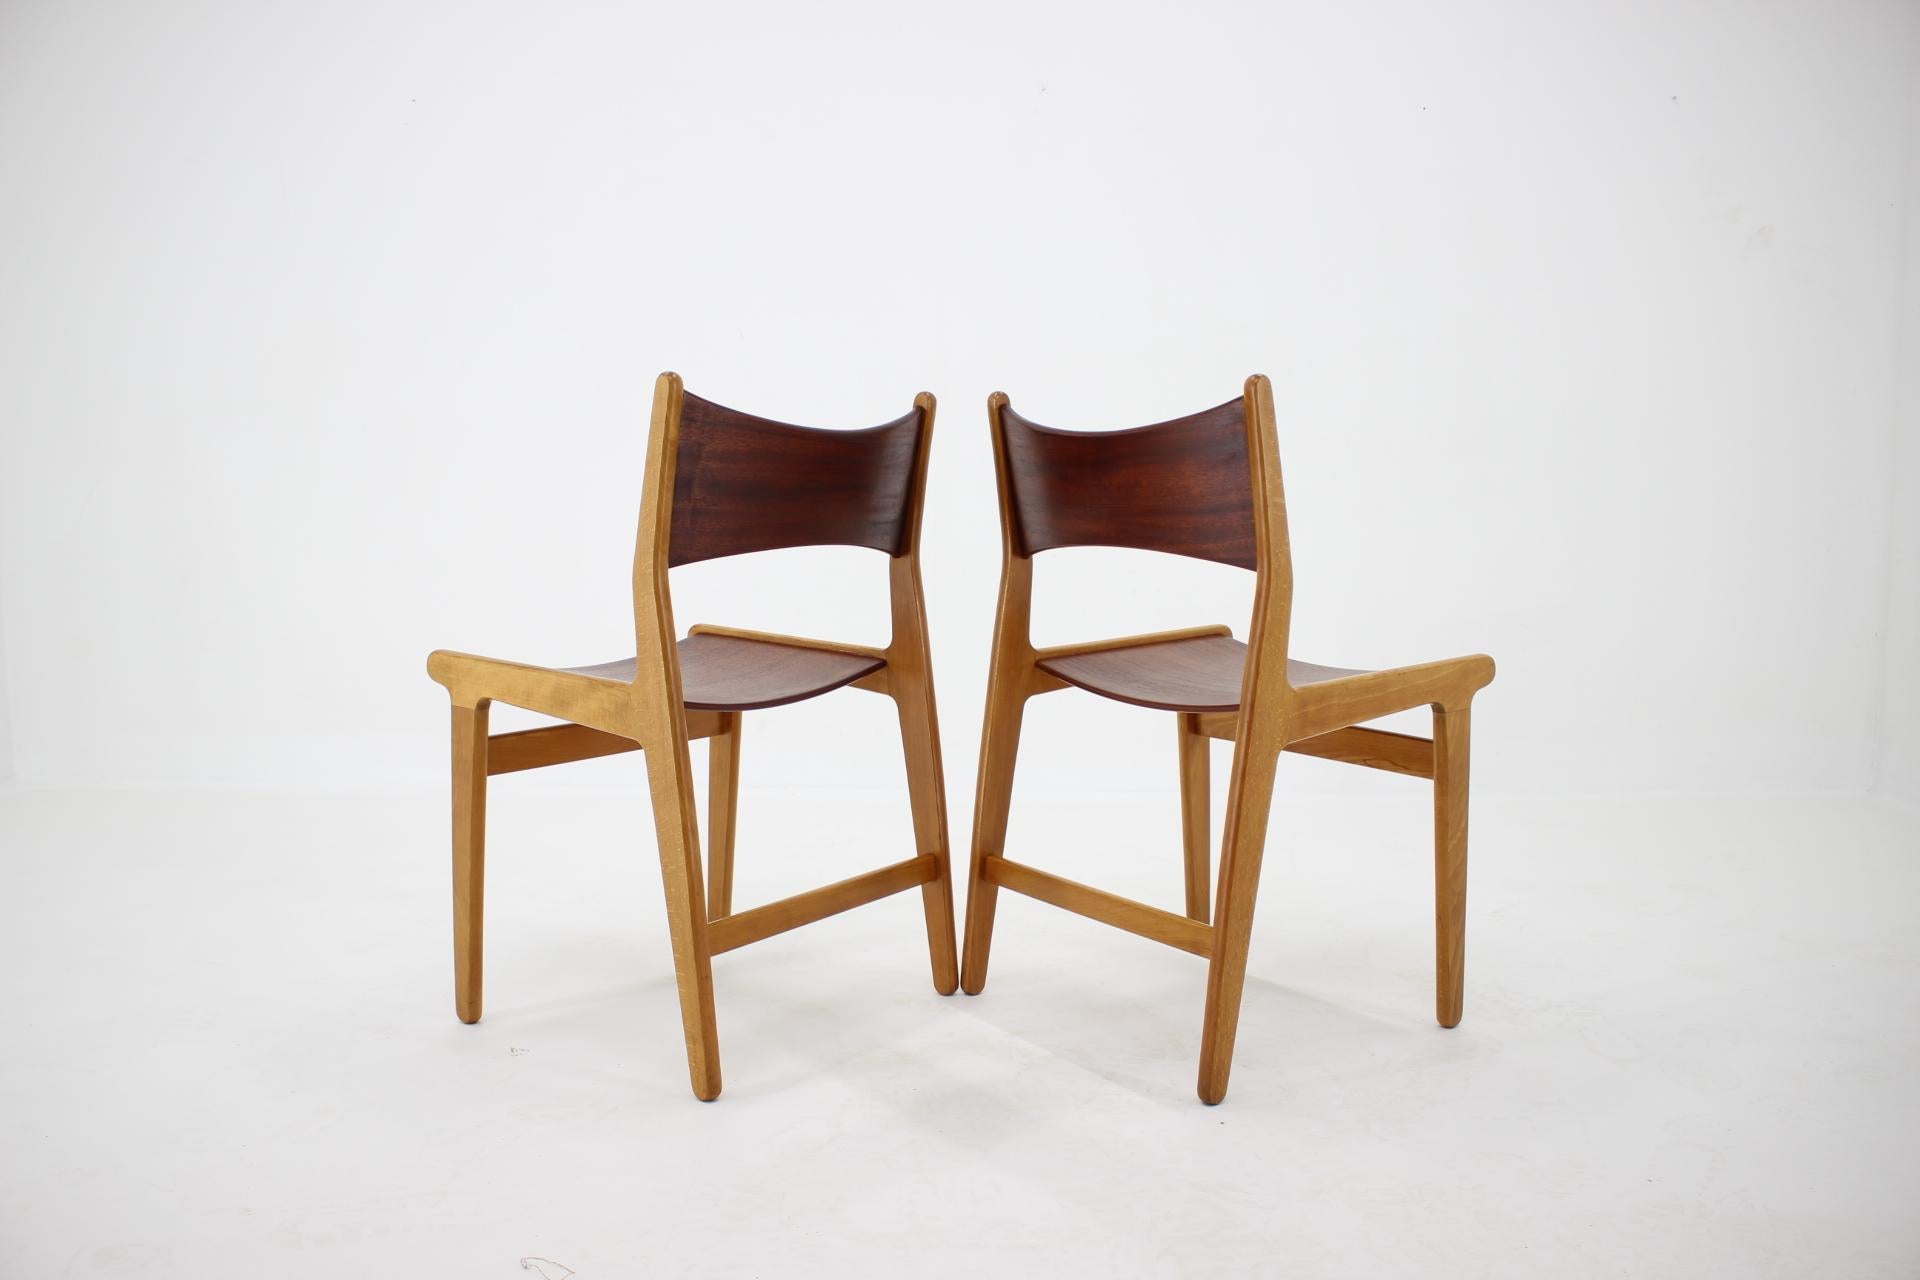 1960s Set of 4 Teak and Beech Dining Chairs, Denmark 2